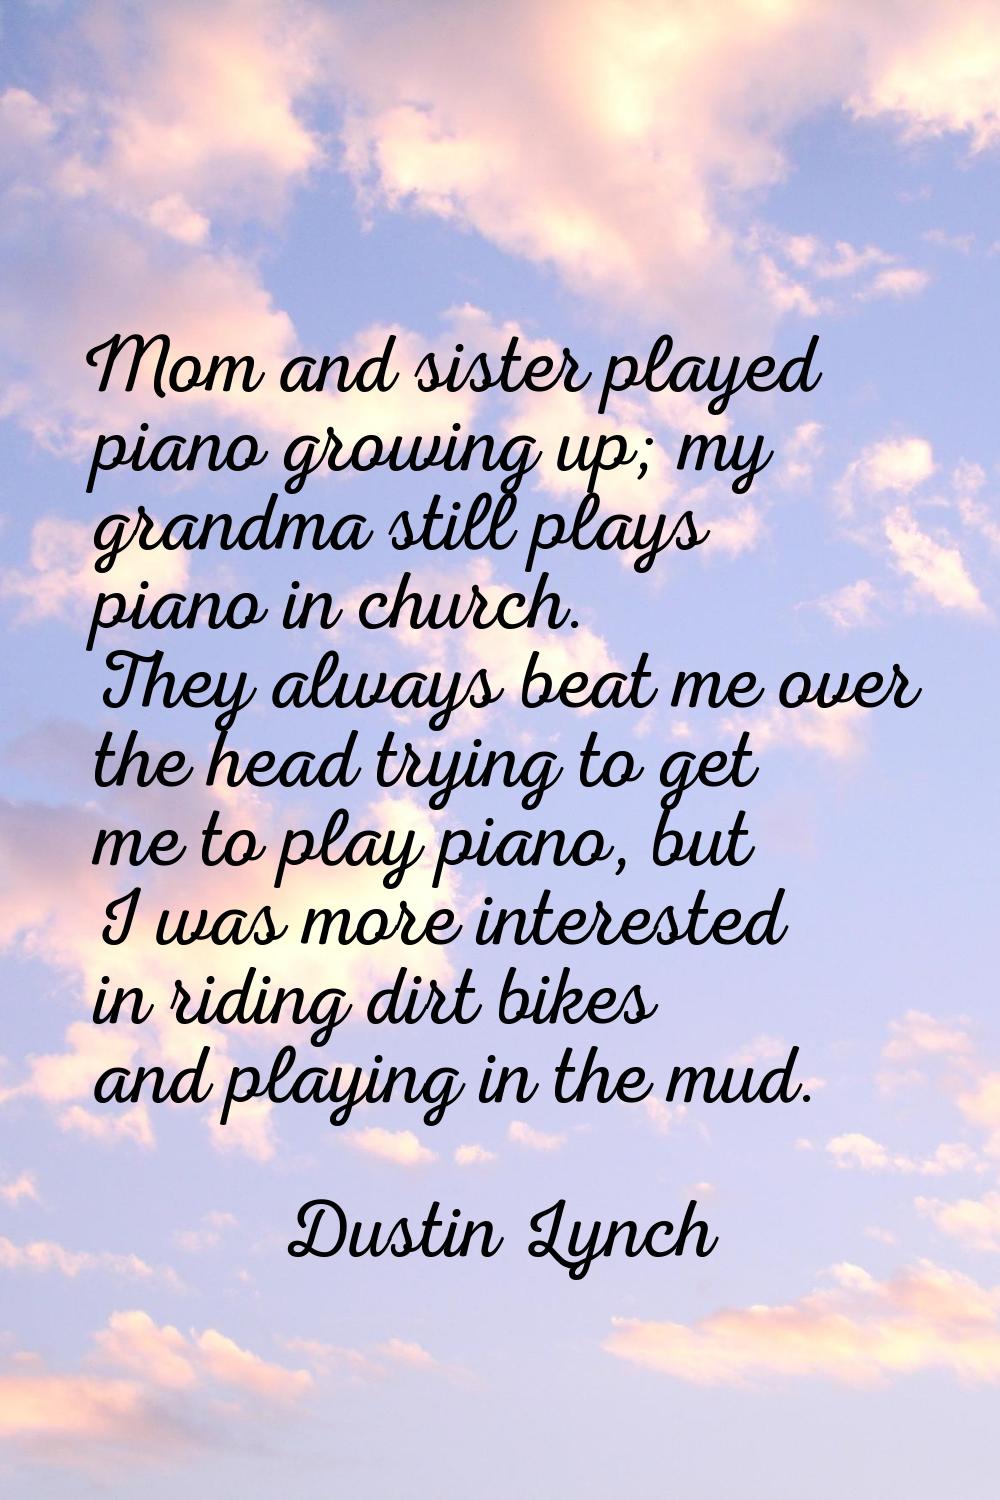 Mom and sister played piano growing up; my grandma still plays piano in church. They always beat me